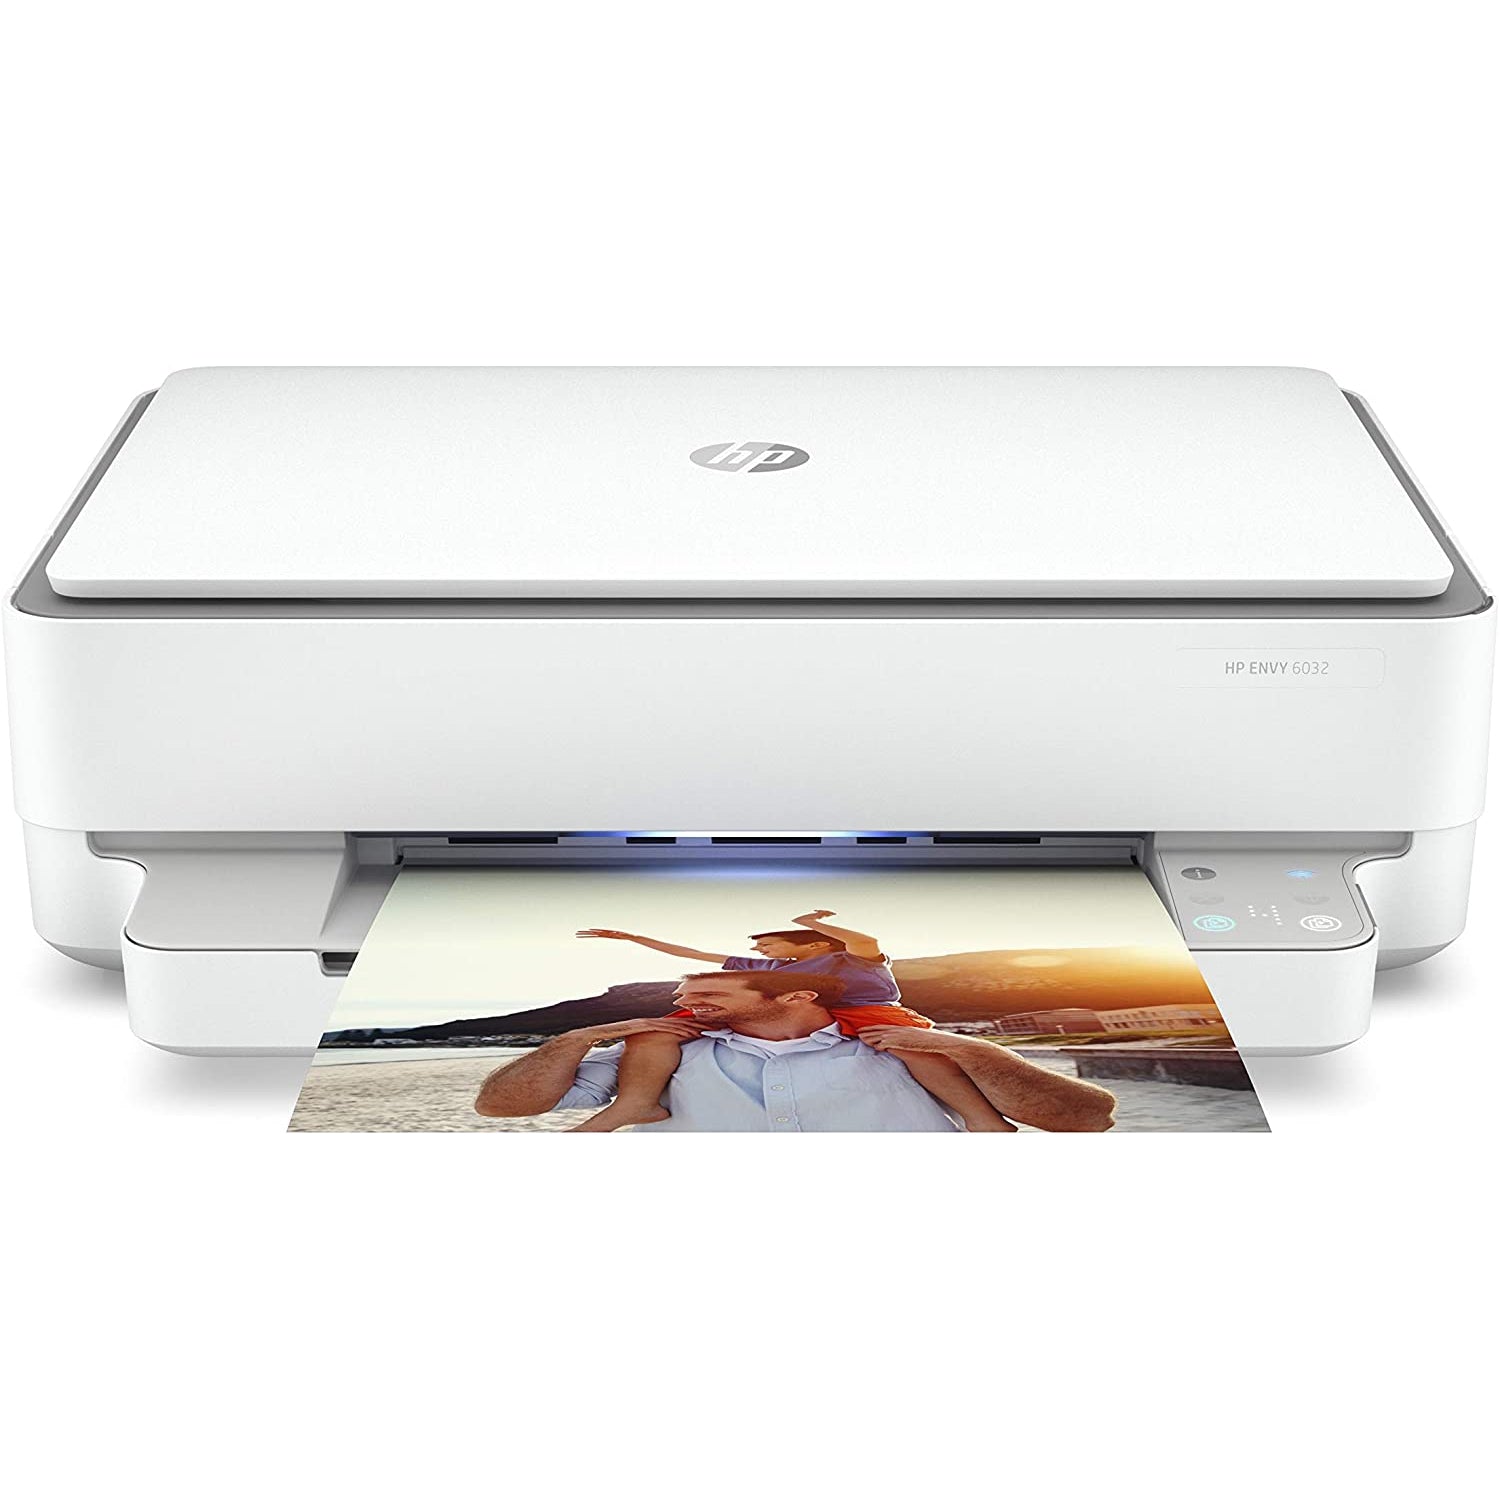 HP Envy 6032 All-in-One Wireless Inkjet Printer, White - Refurbished Excellent